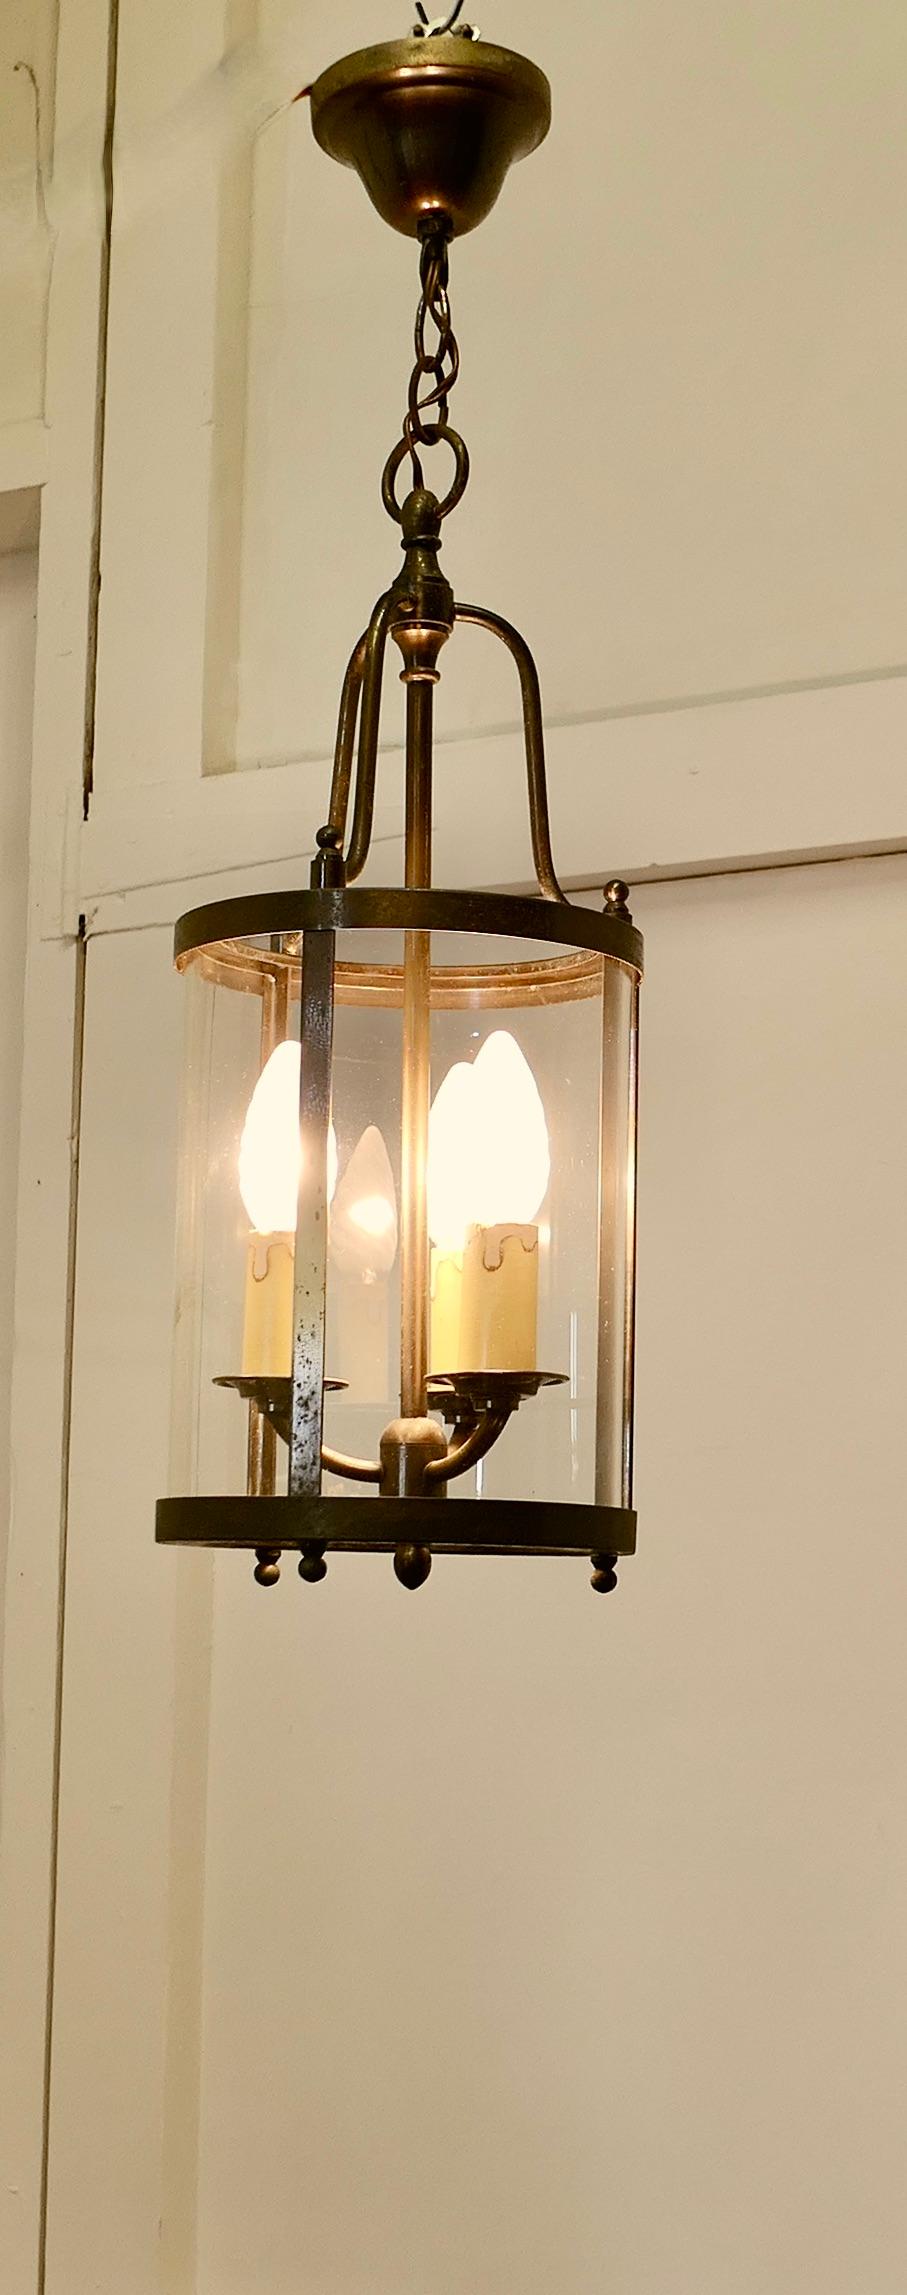 French Art Deco Brass and Glass Lantern Hall Light

A traditional hall lantern, the light has a cylindrical glass shade, and a triple light fitting to the interior it hangs on a short chain from an aged brass ceiling rose
The lantern gives a